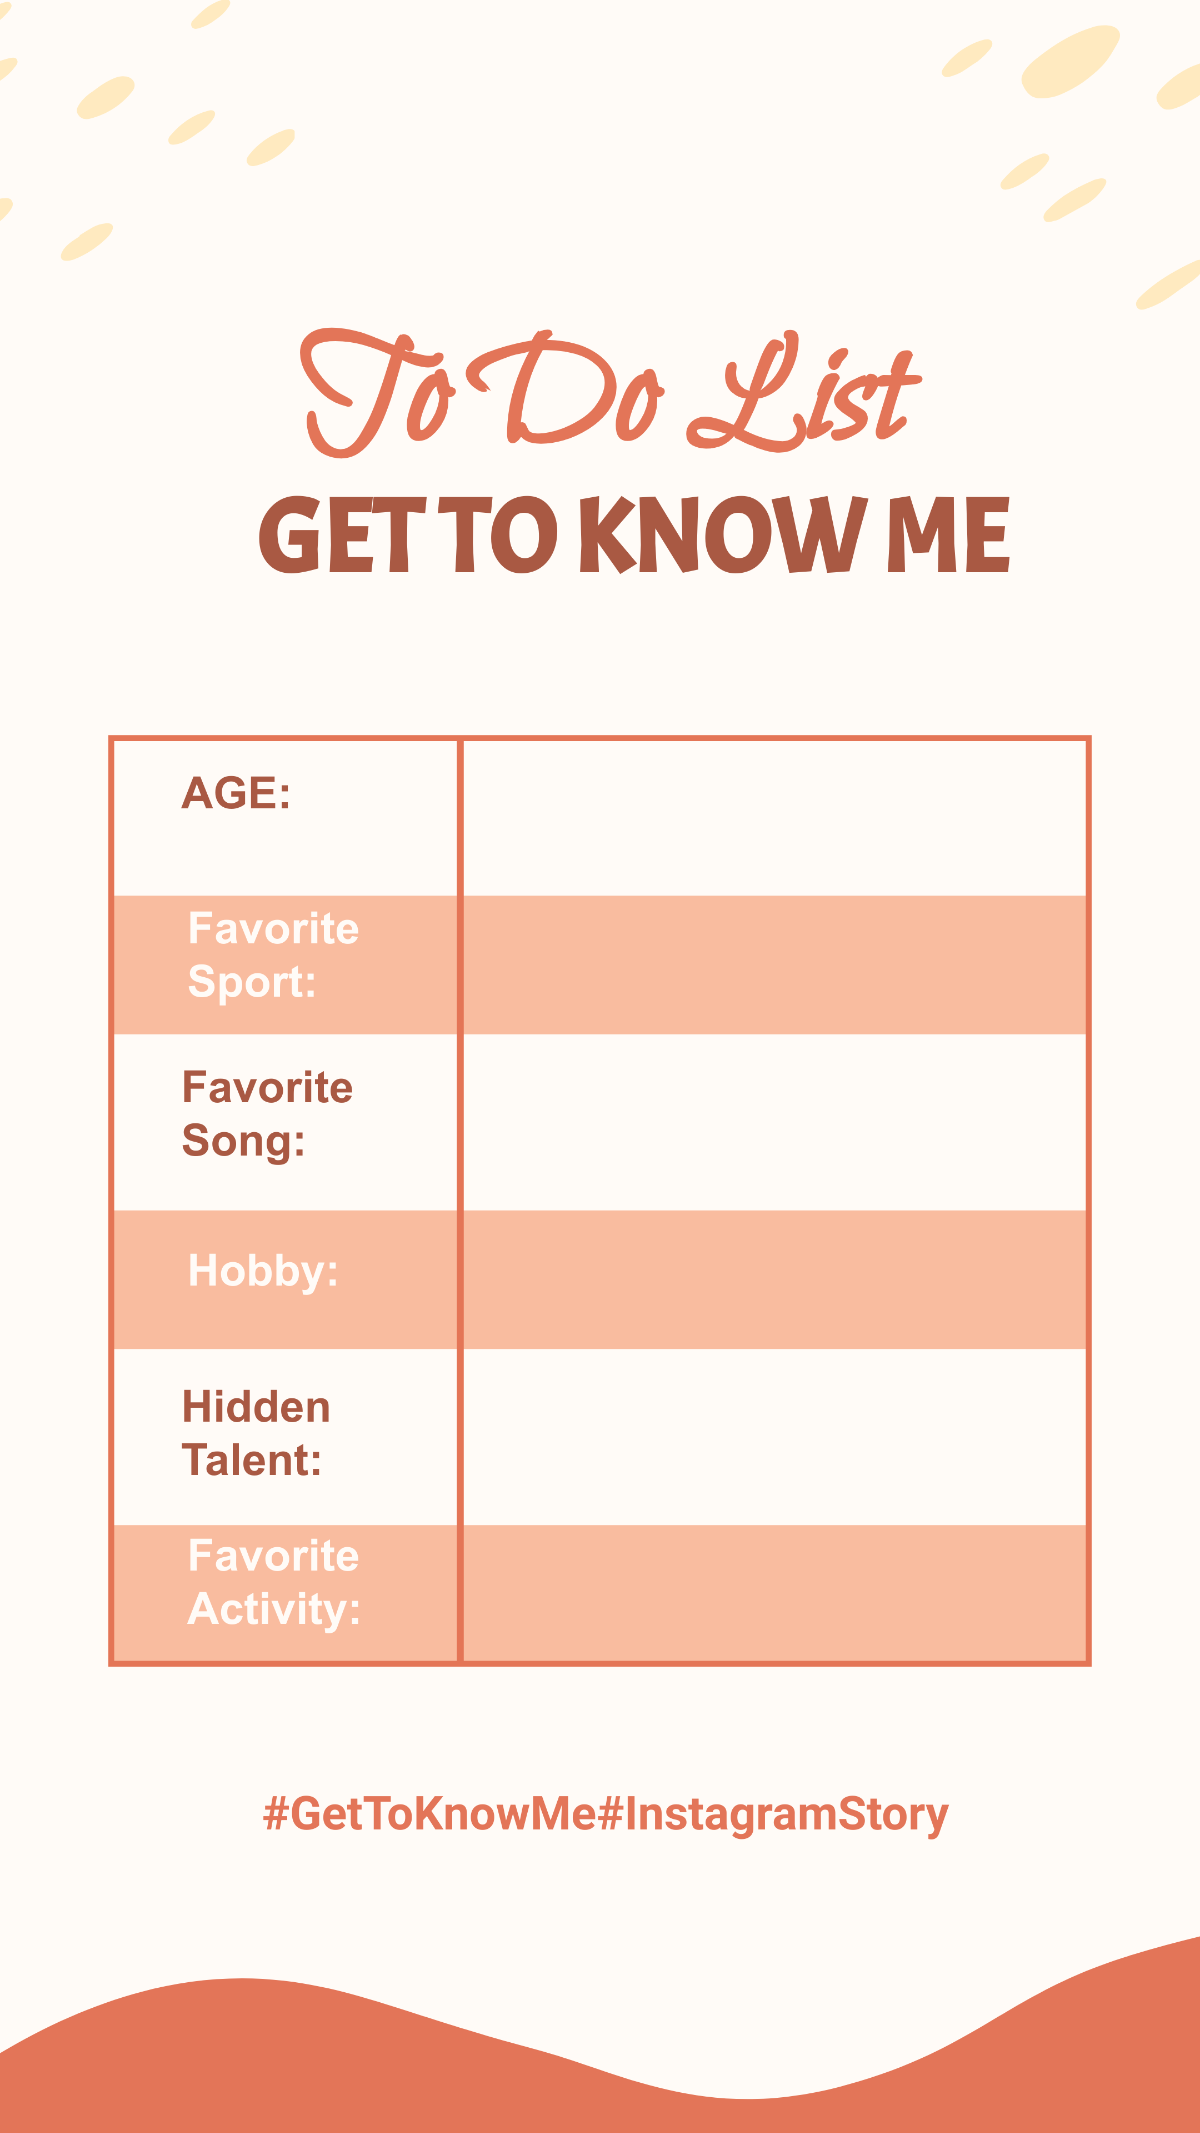 To Do List Get to Know Me Instagram Story Template